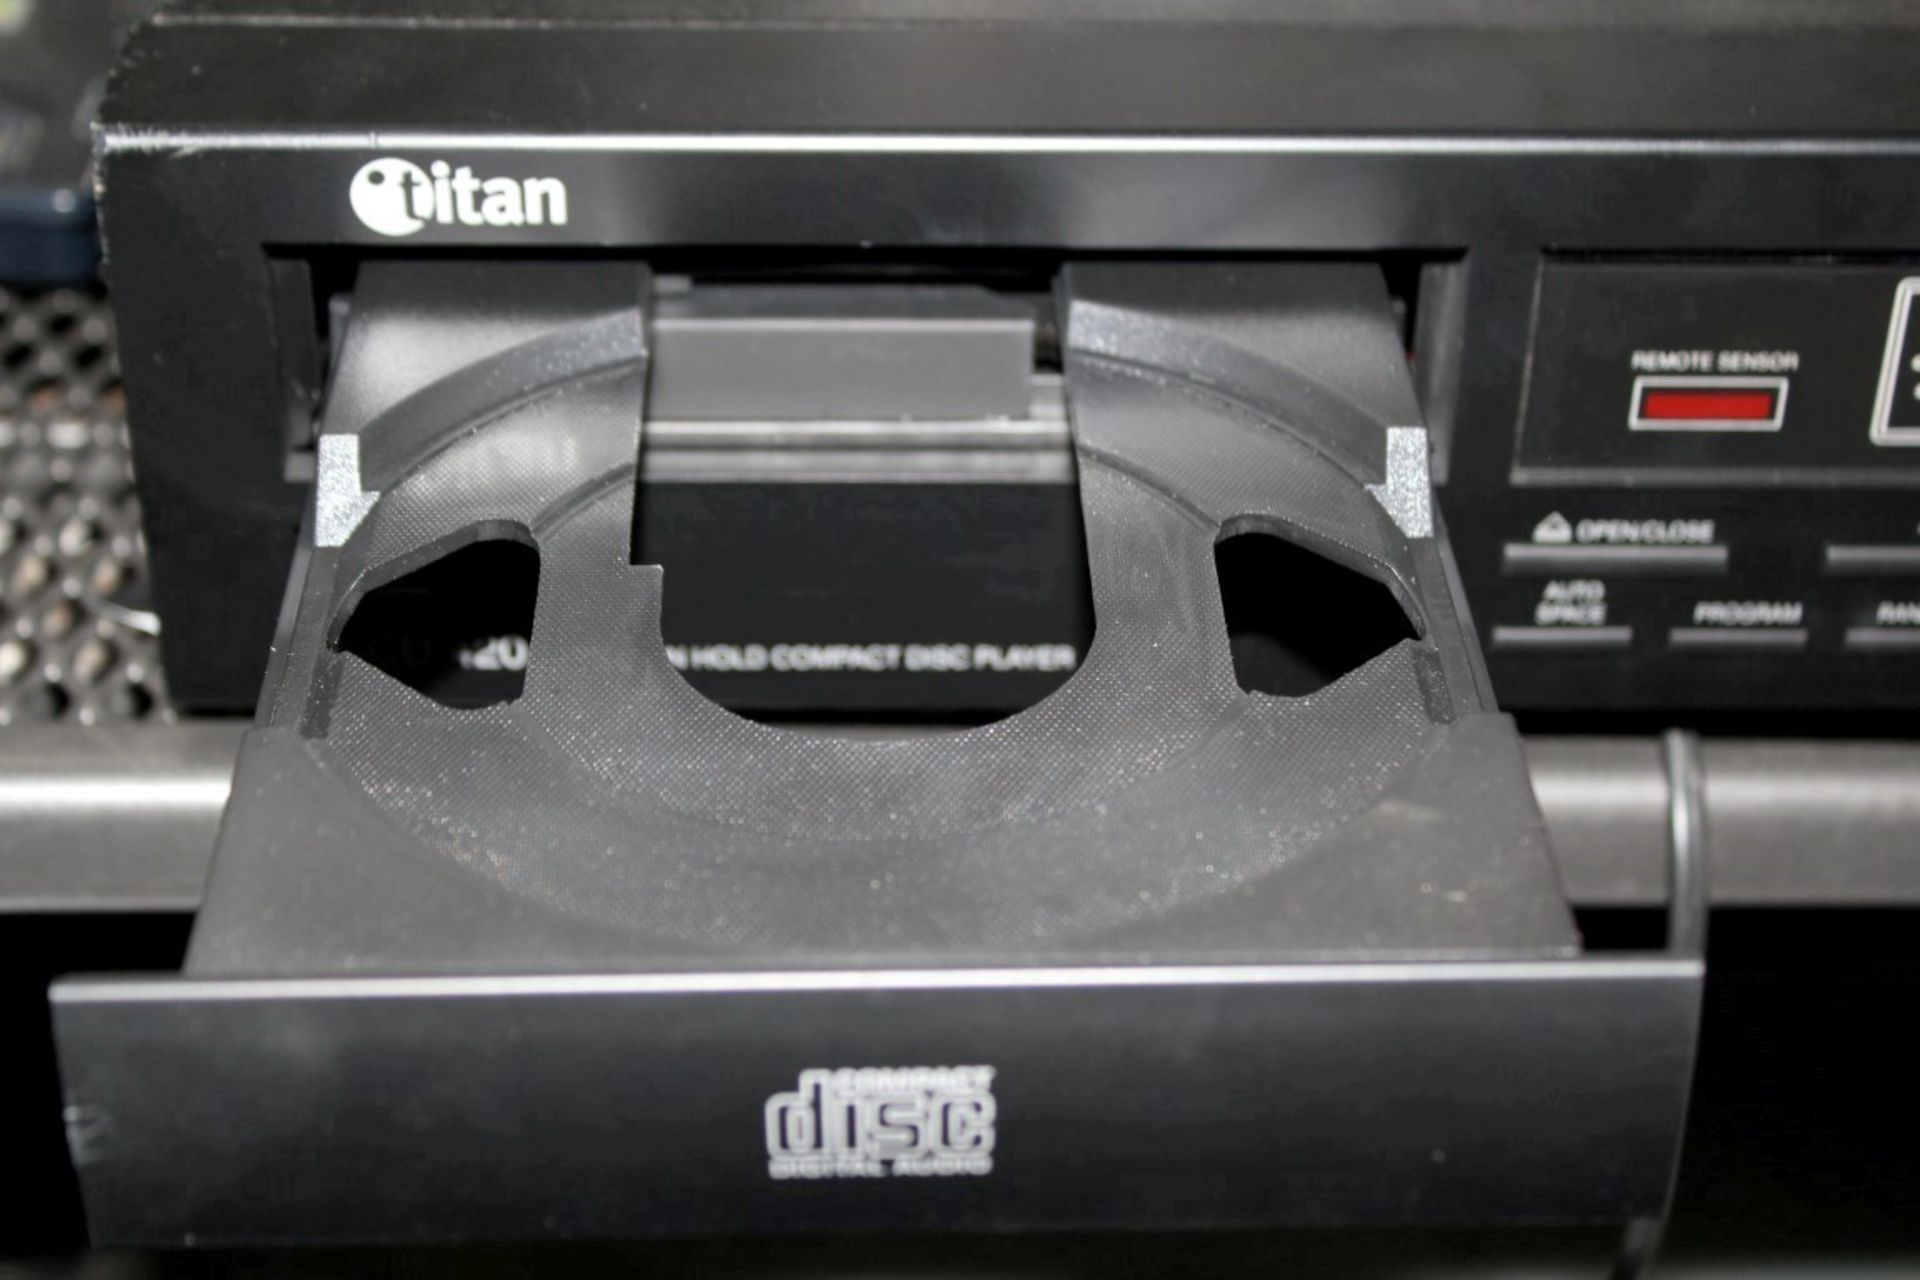 1 x TITAN Music On Hold CD Player - CD420 - Preowned, In Good Condition - UK Power Cord- Ref: - Image 4 of 5